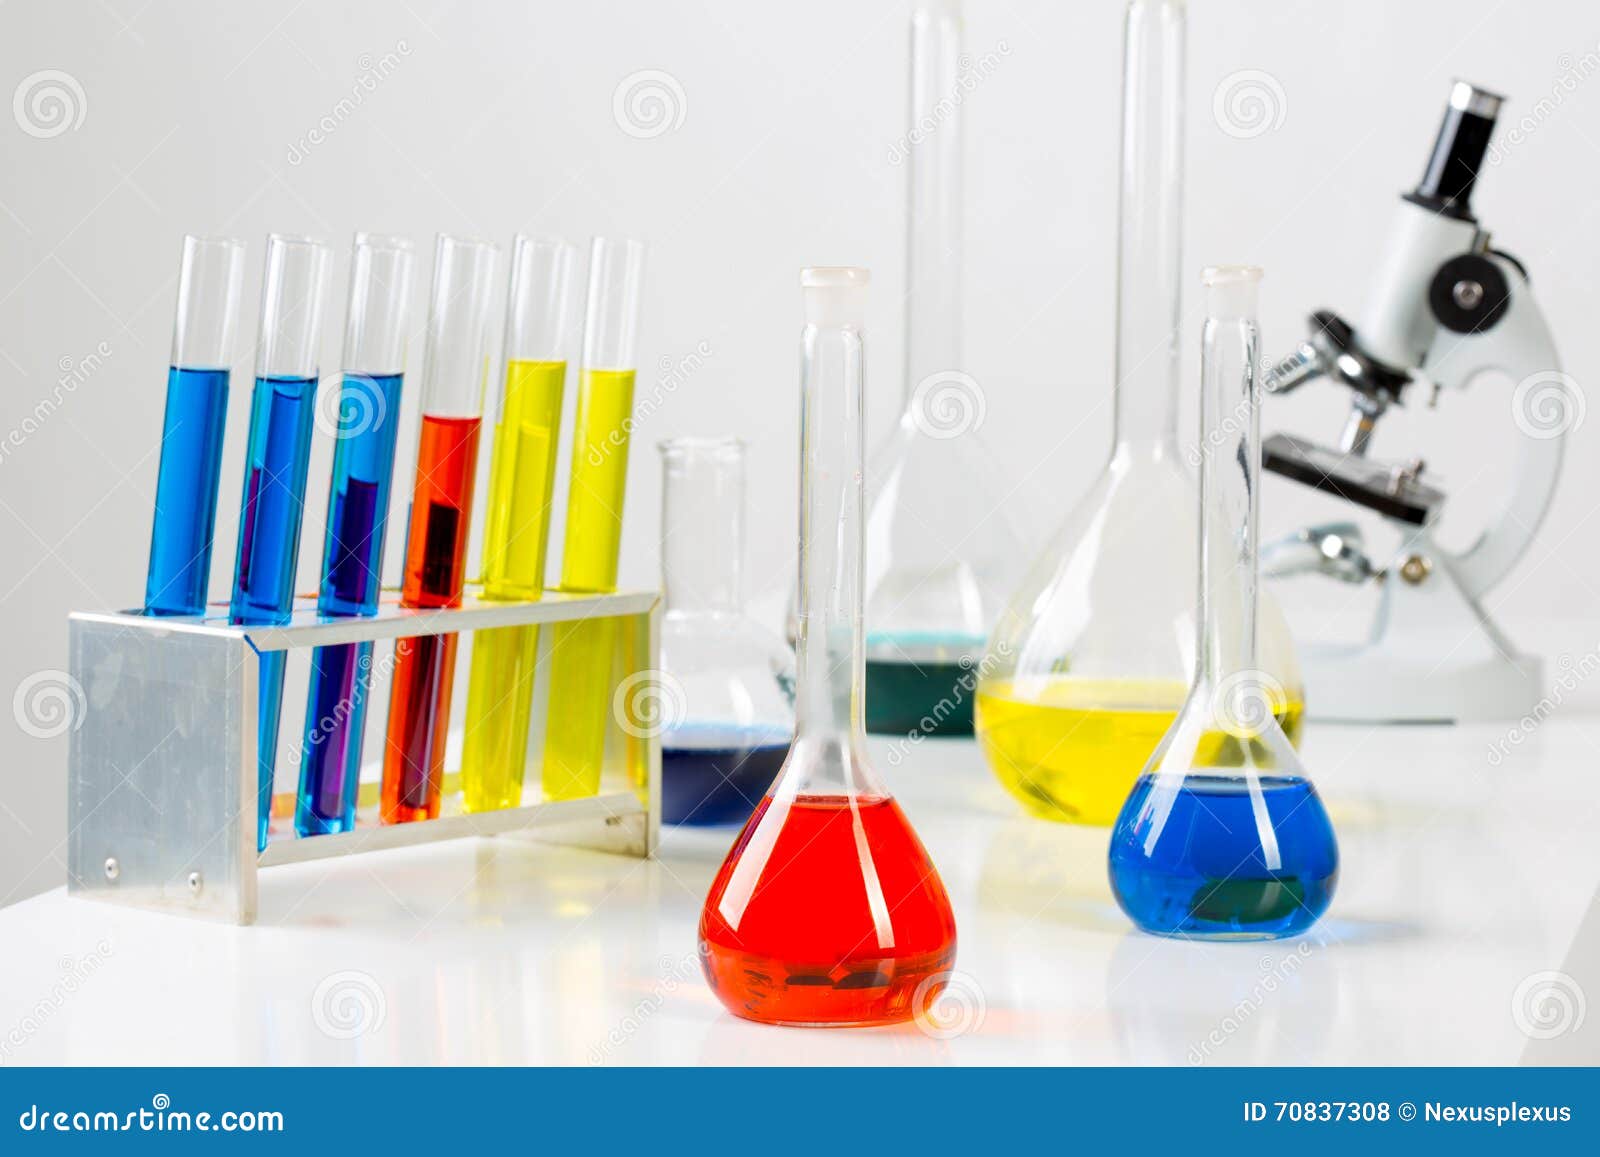 Color Science Beaker Pictures To Pin On Pinterest Pinsdaddy Coloring Wallpapers Download Free Images Wallpaper [coloring876.blogspot.com]